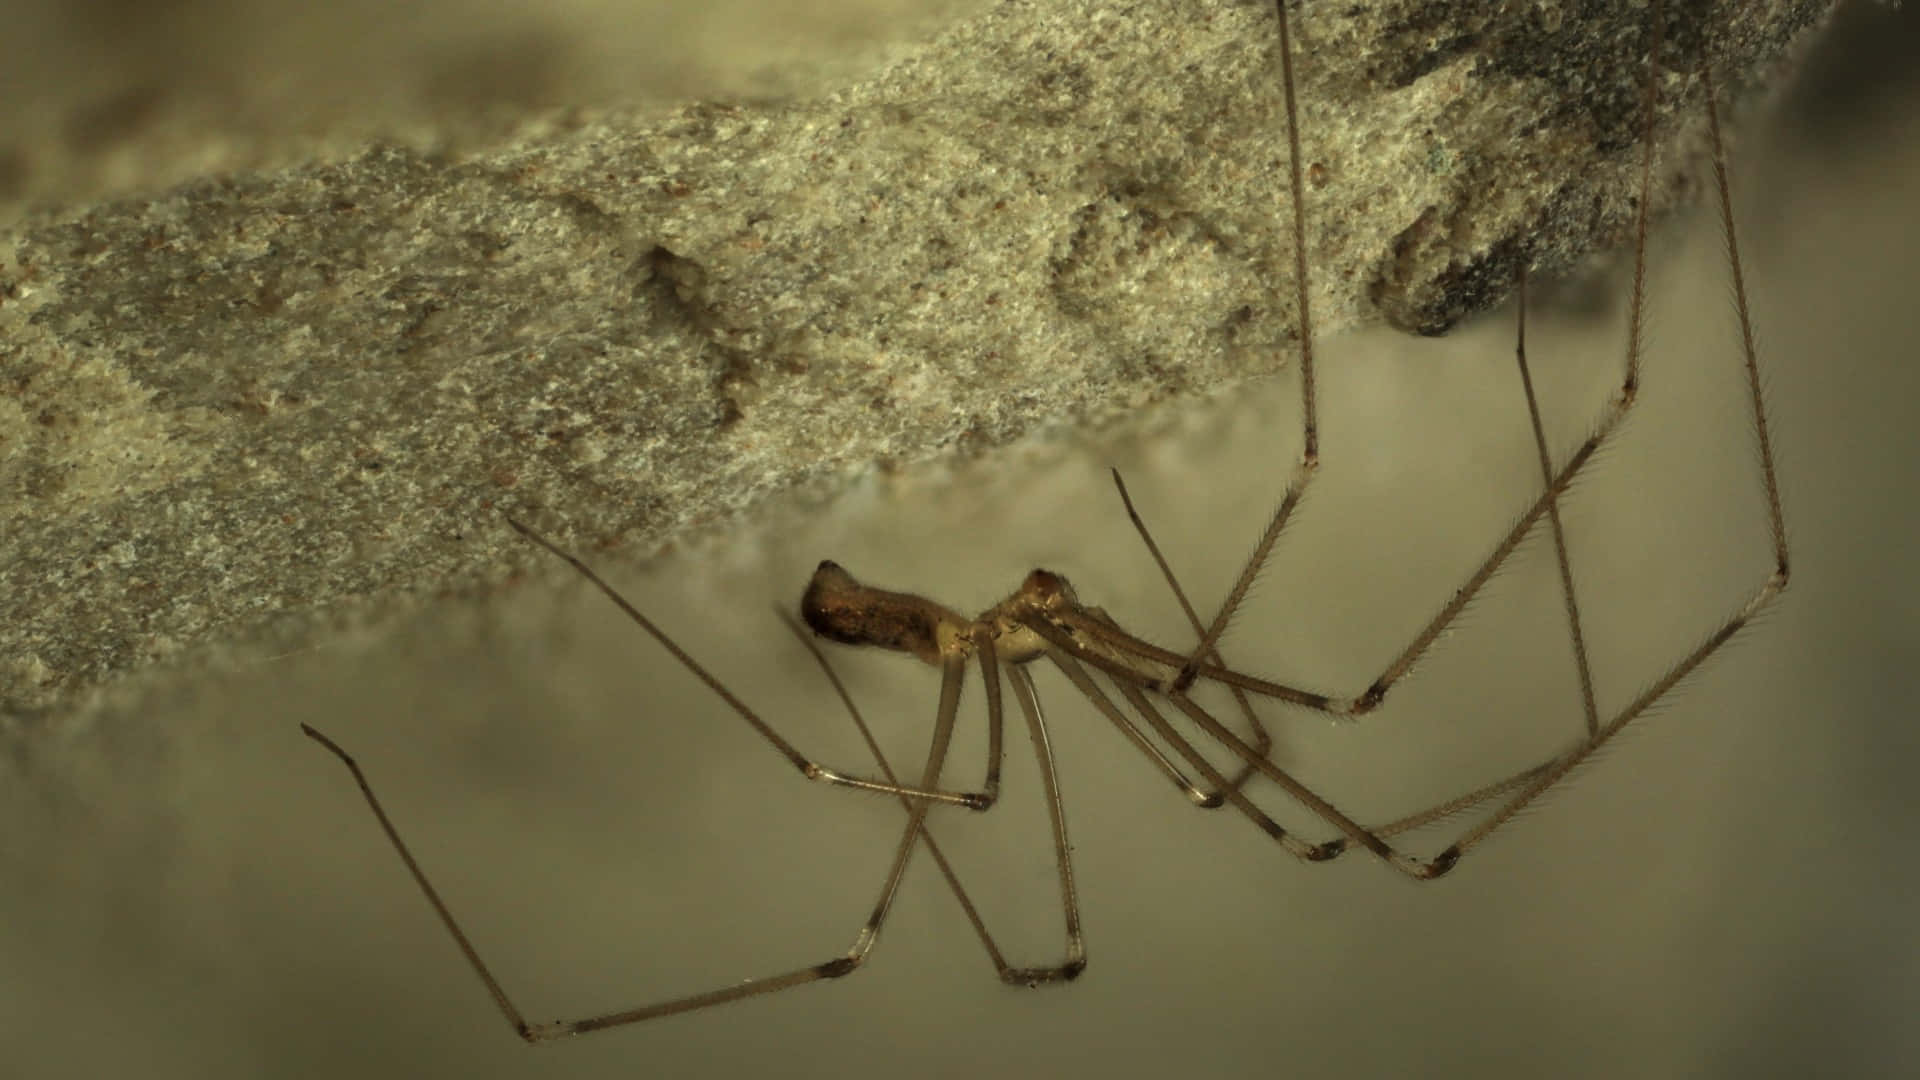 Close-up of a Brown Recluse Spider on Web Wallpaper